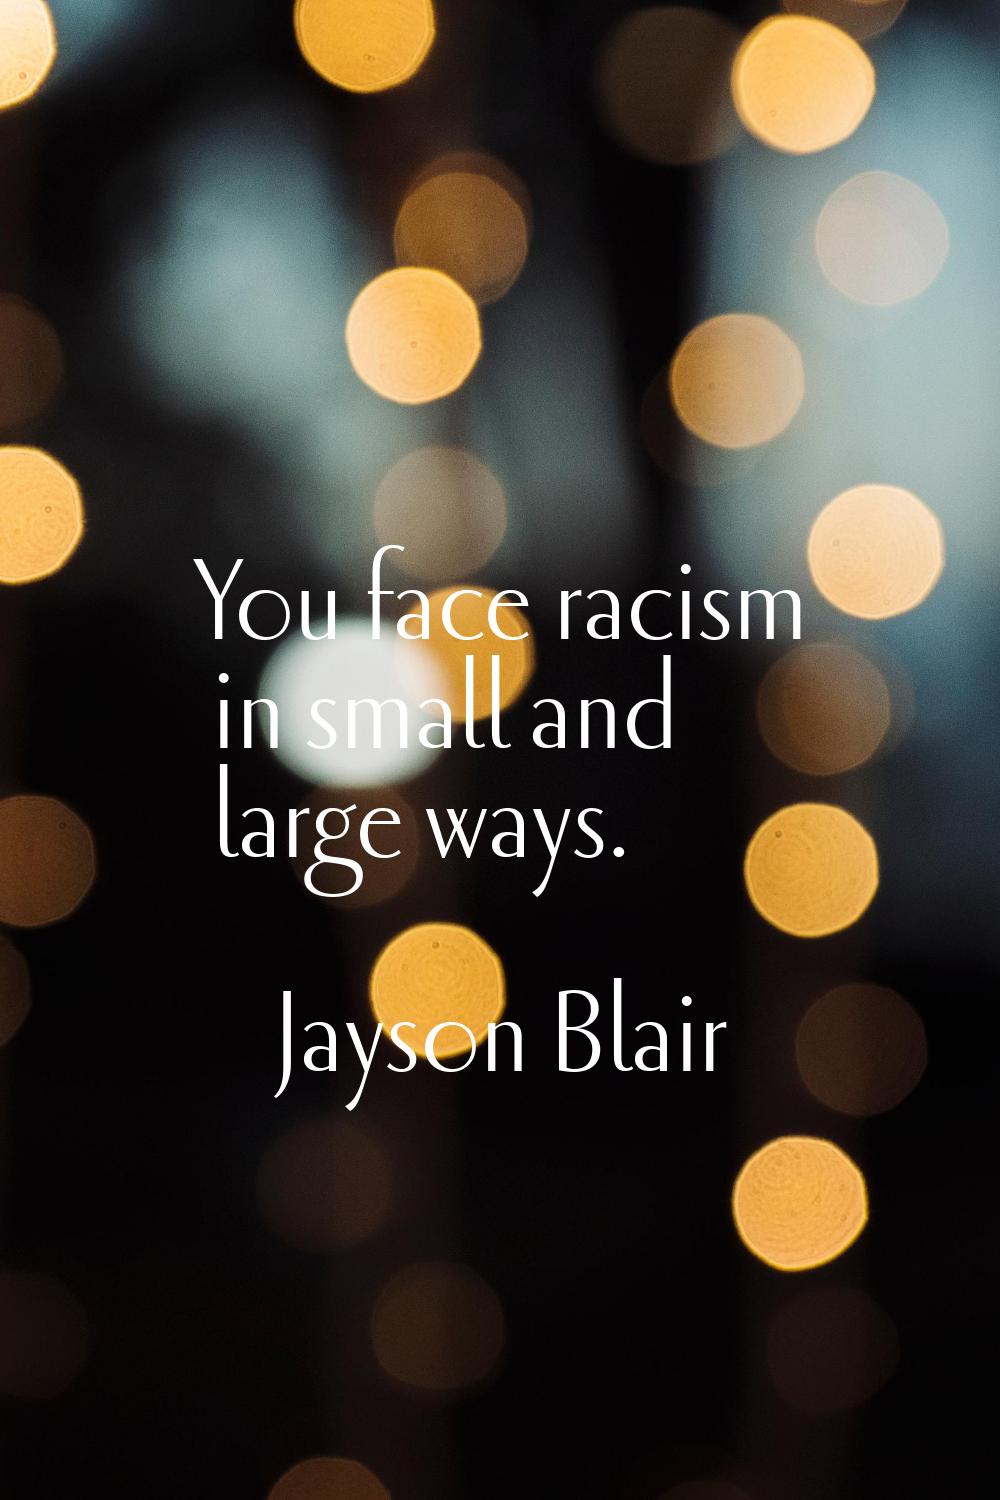 You face racism in small and large ways.